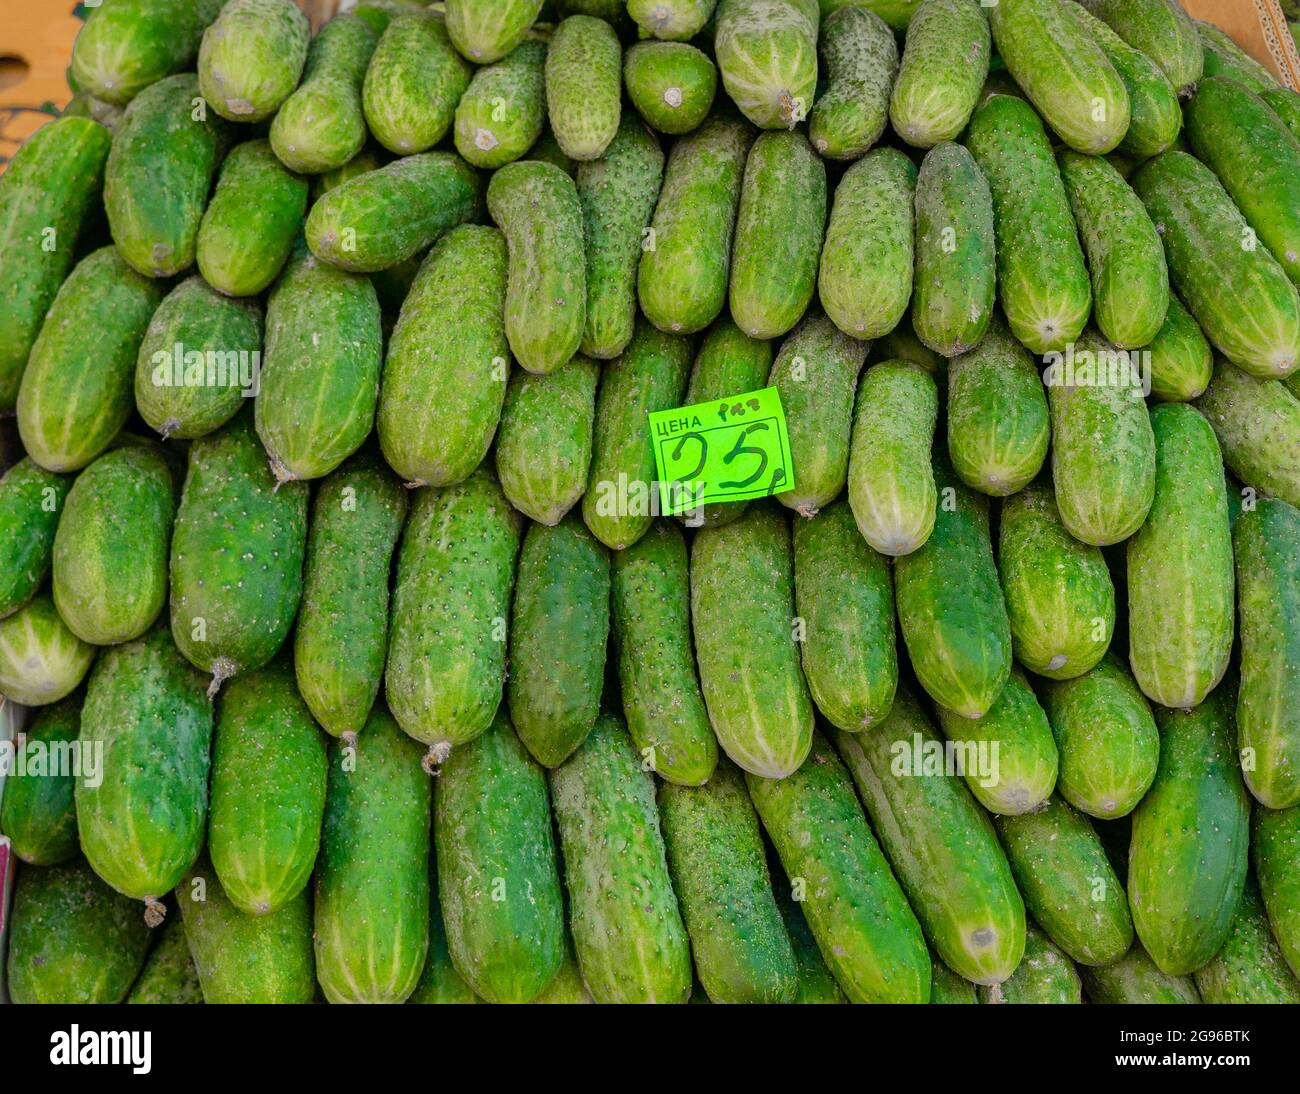 Fresh cucumbers sold at 25 rubles a kilo, or USD 3, at the Sennoy market, the cheapest one in St. Petersburg, Russia Stock Photo